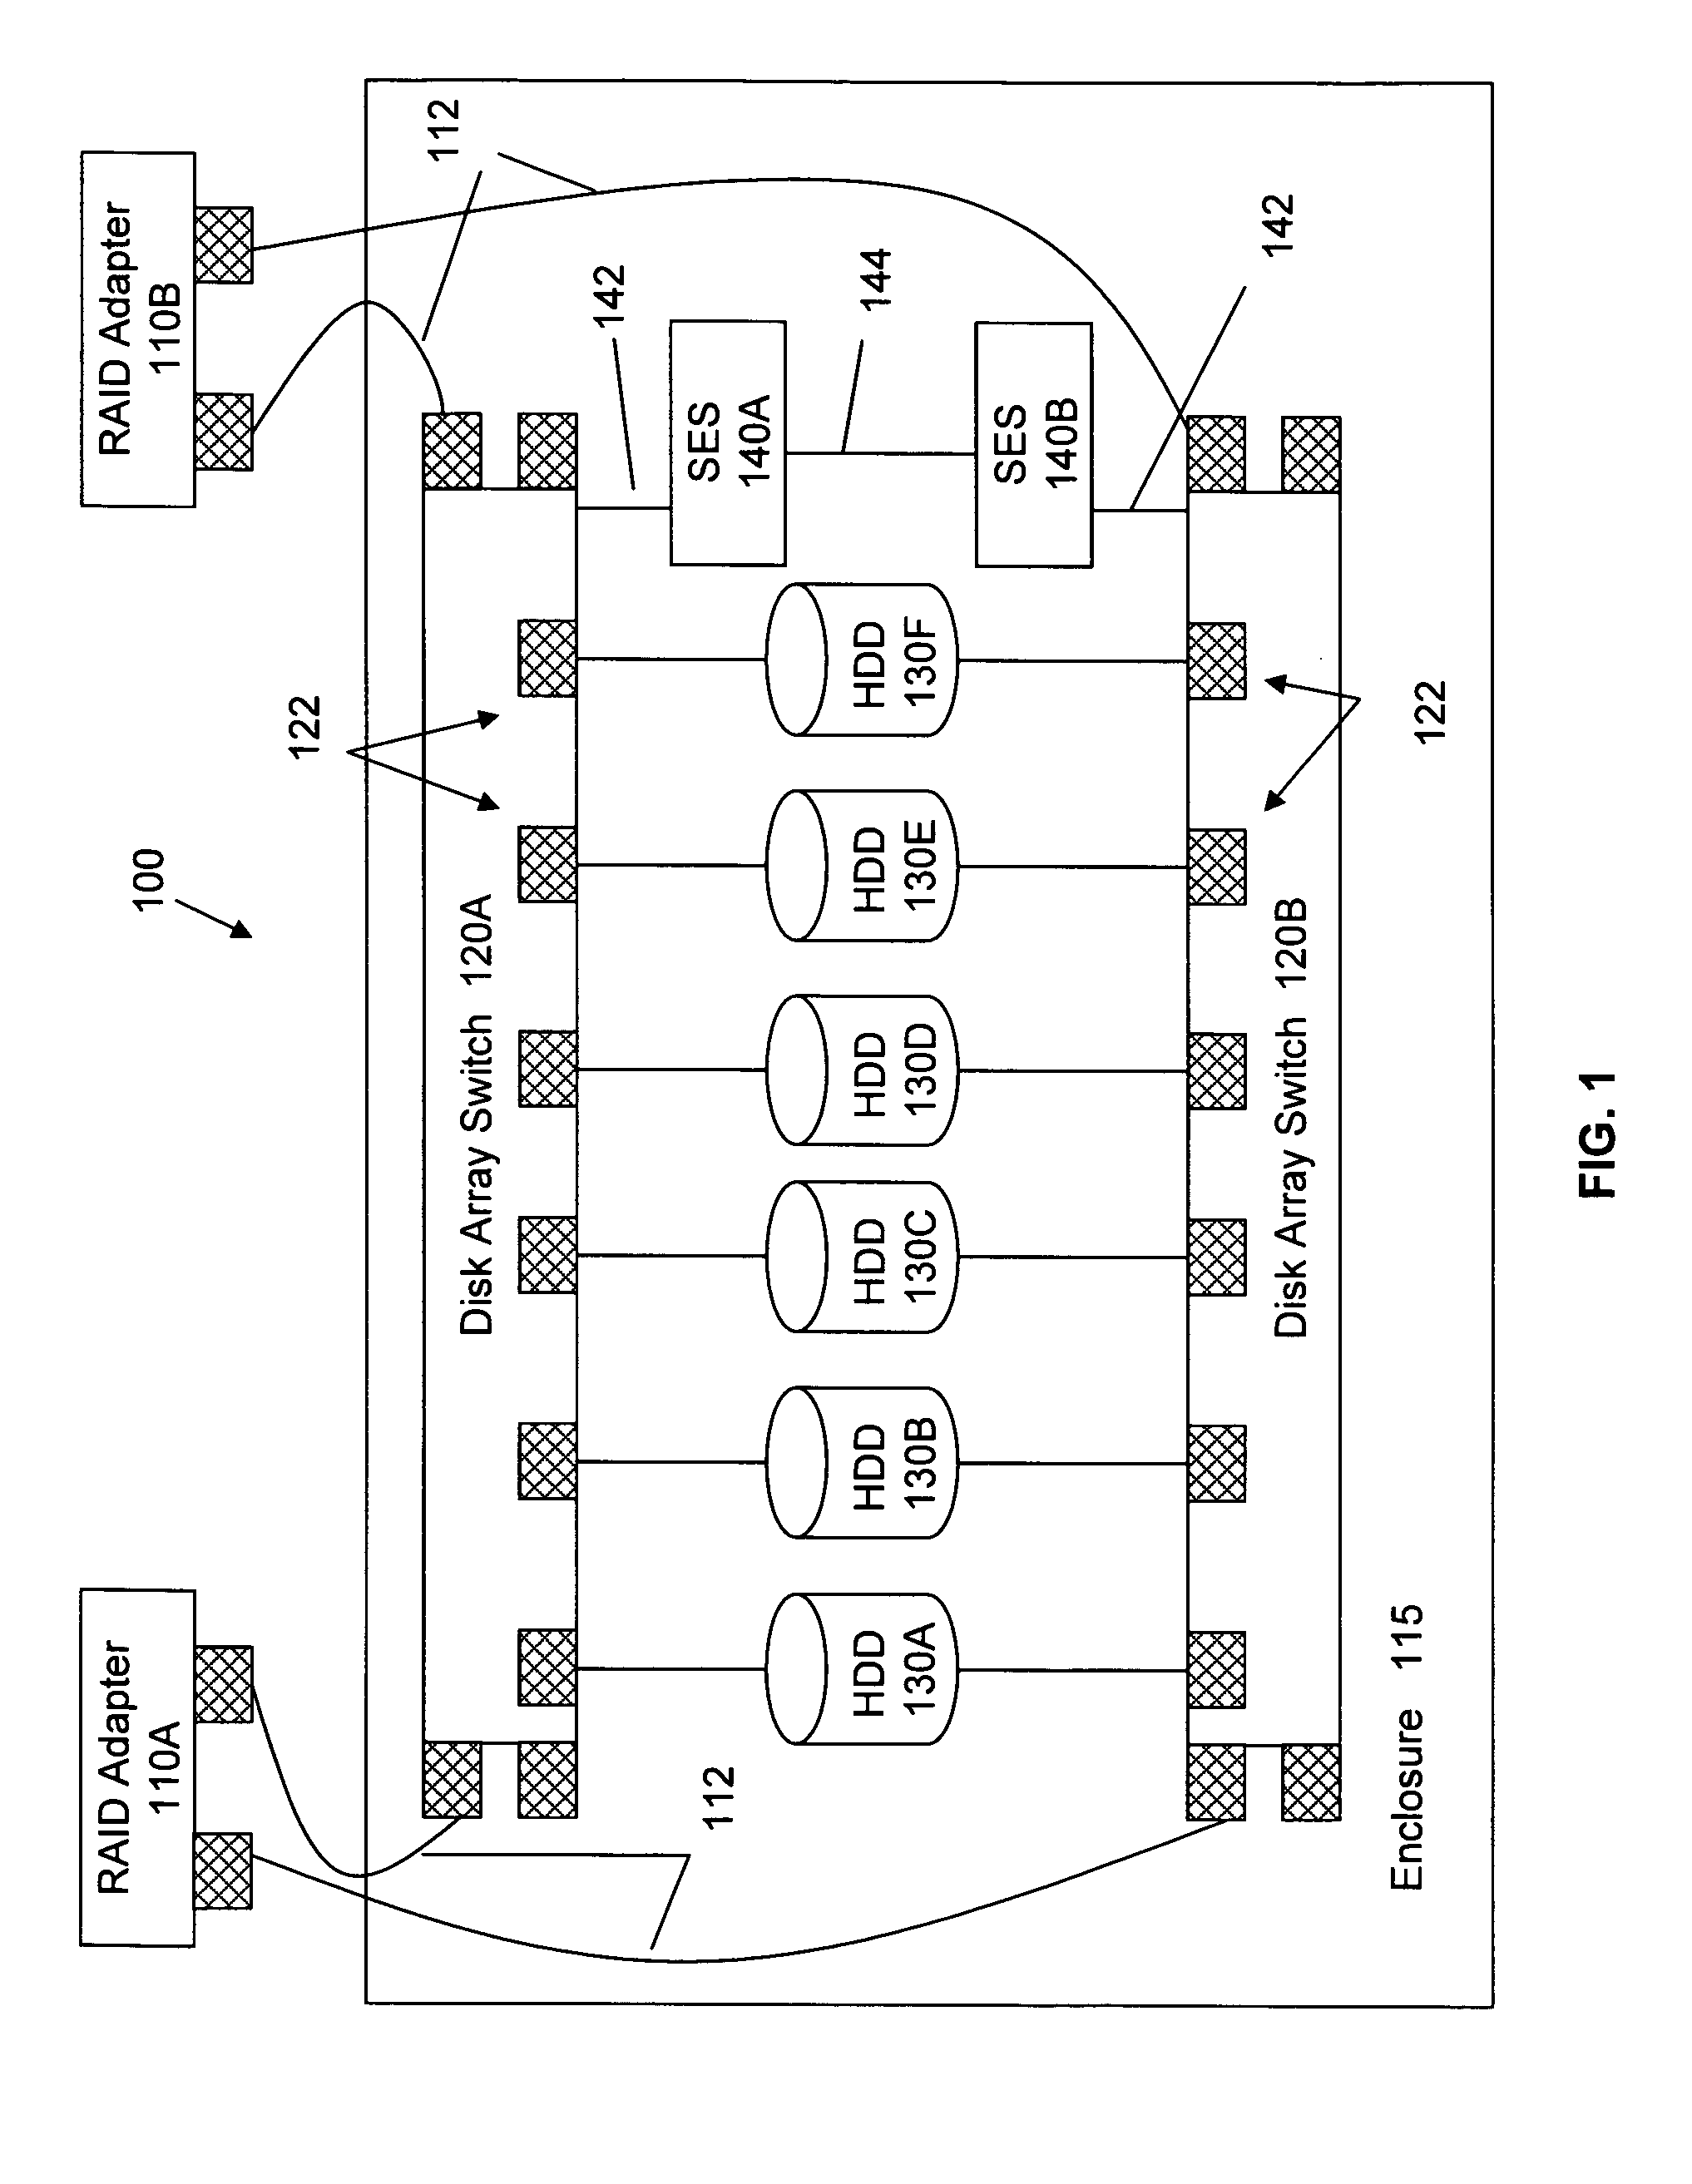 Offloading disk-related tasks from RAID adapter to distributed service processors in switched drive connection network enclosure